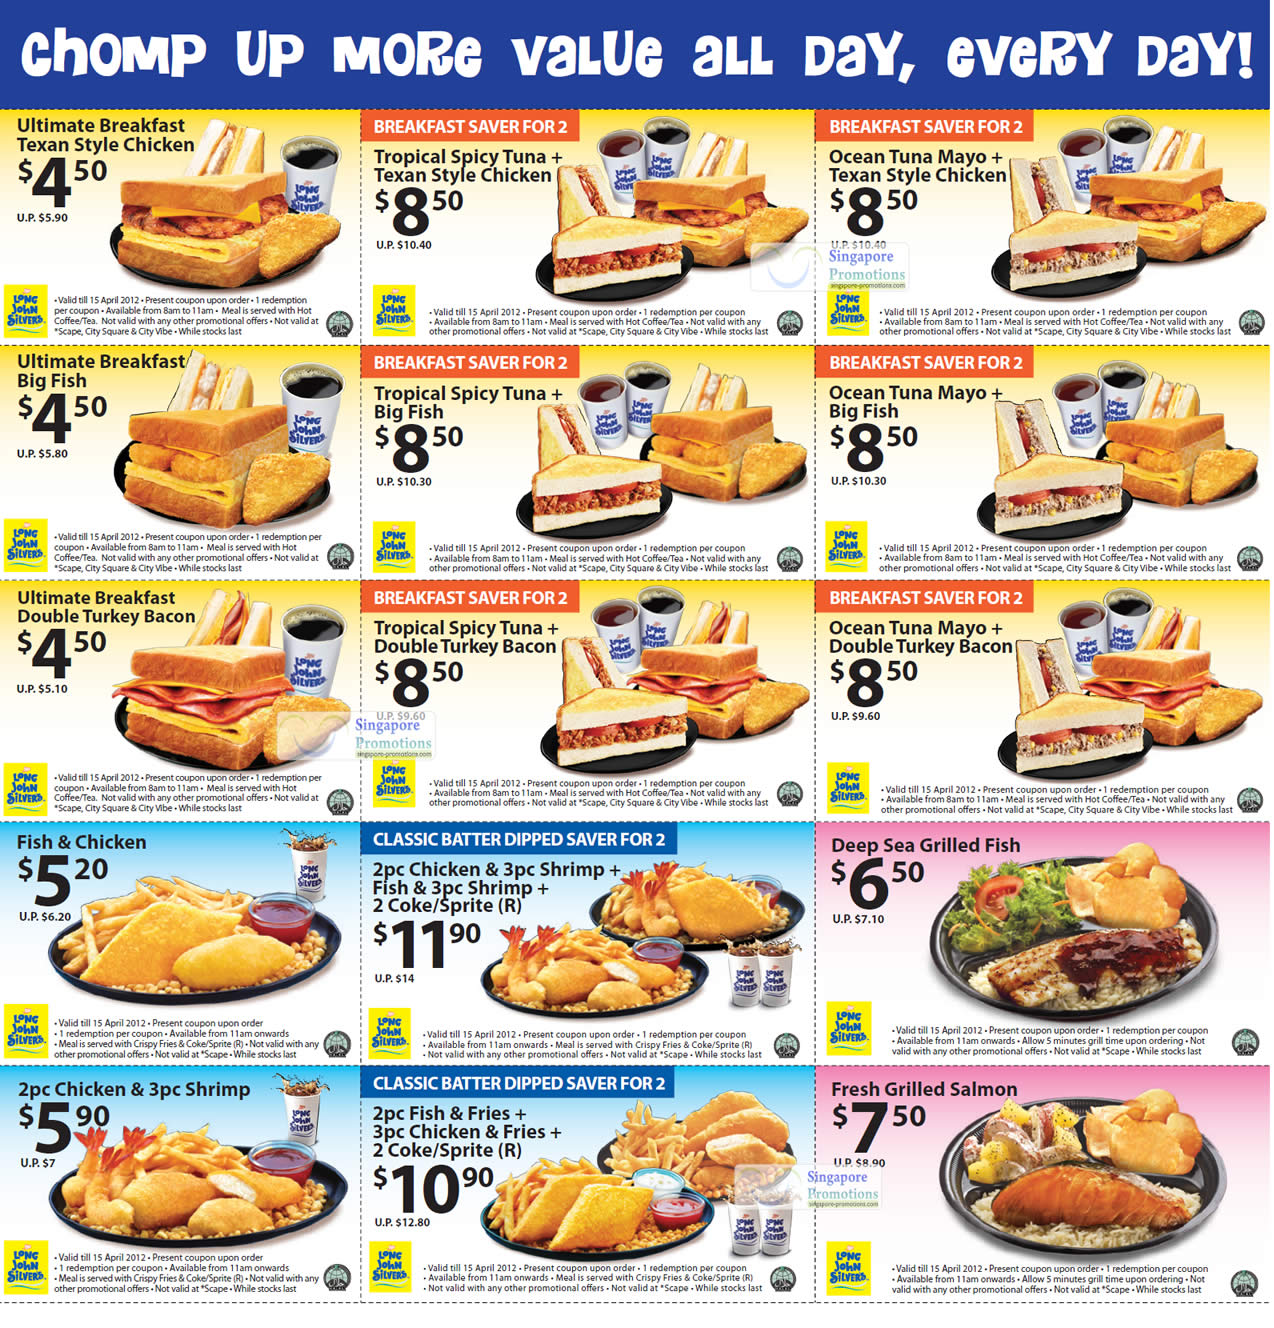 All You Need: Long John Silvers Coupons